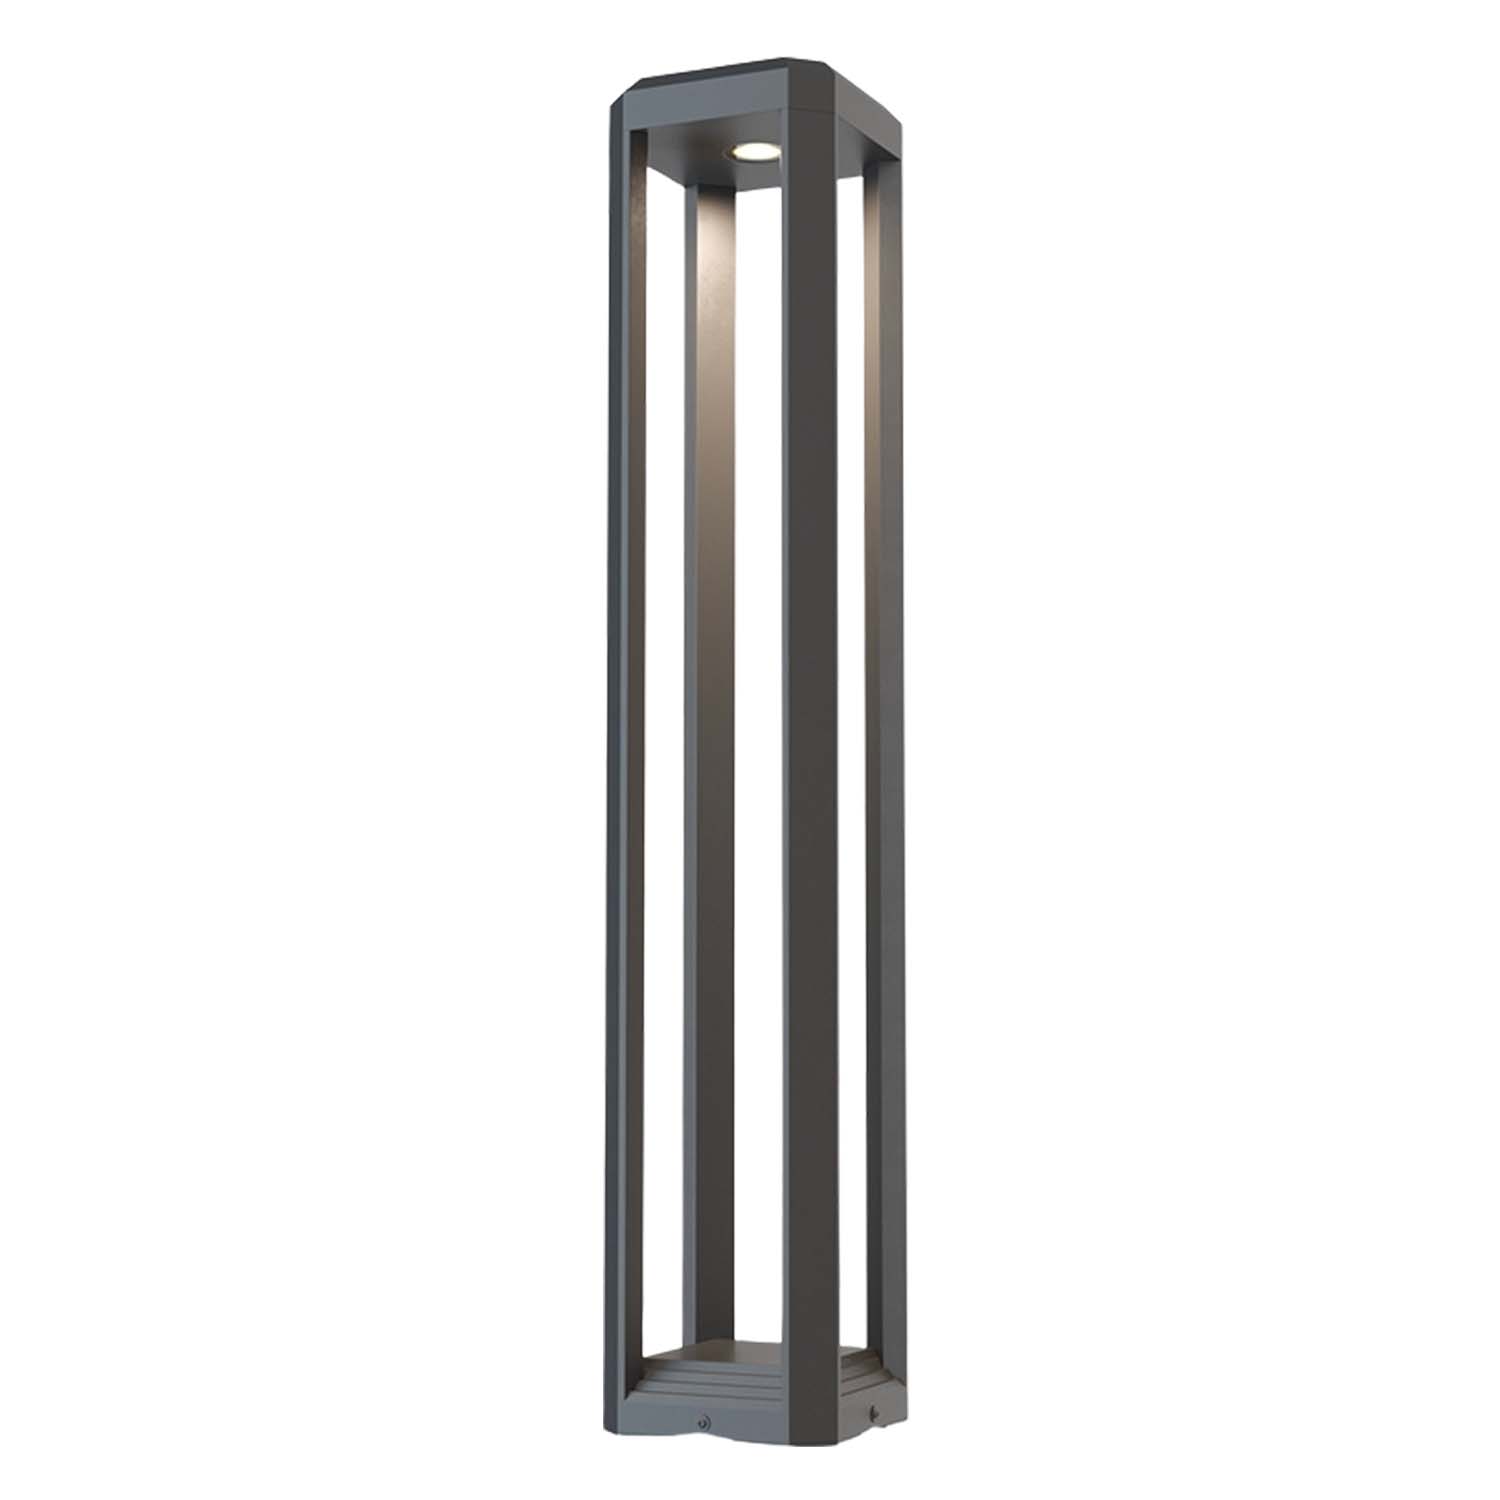 ROYAL MILE A - Waterproof black outdoor light, design and modern